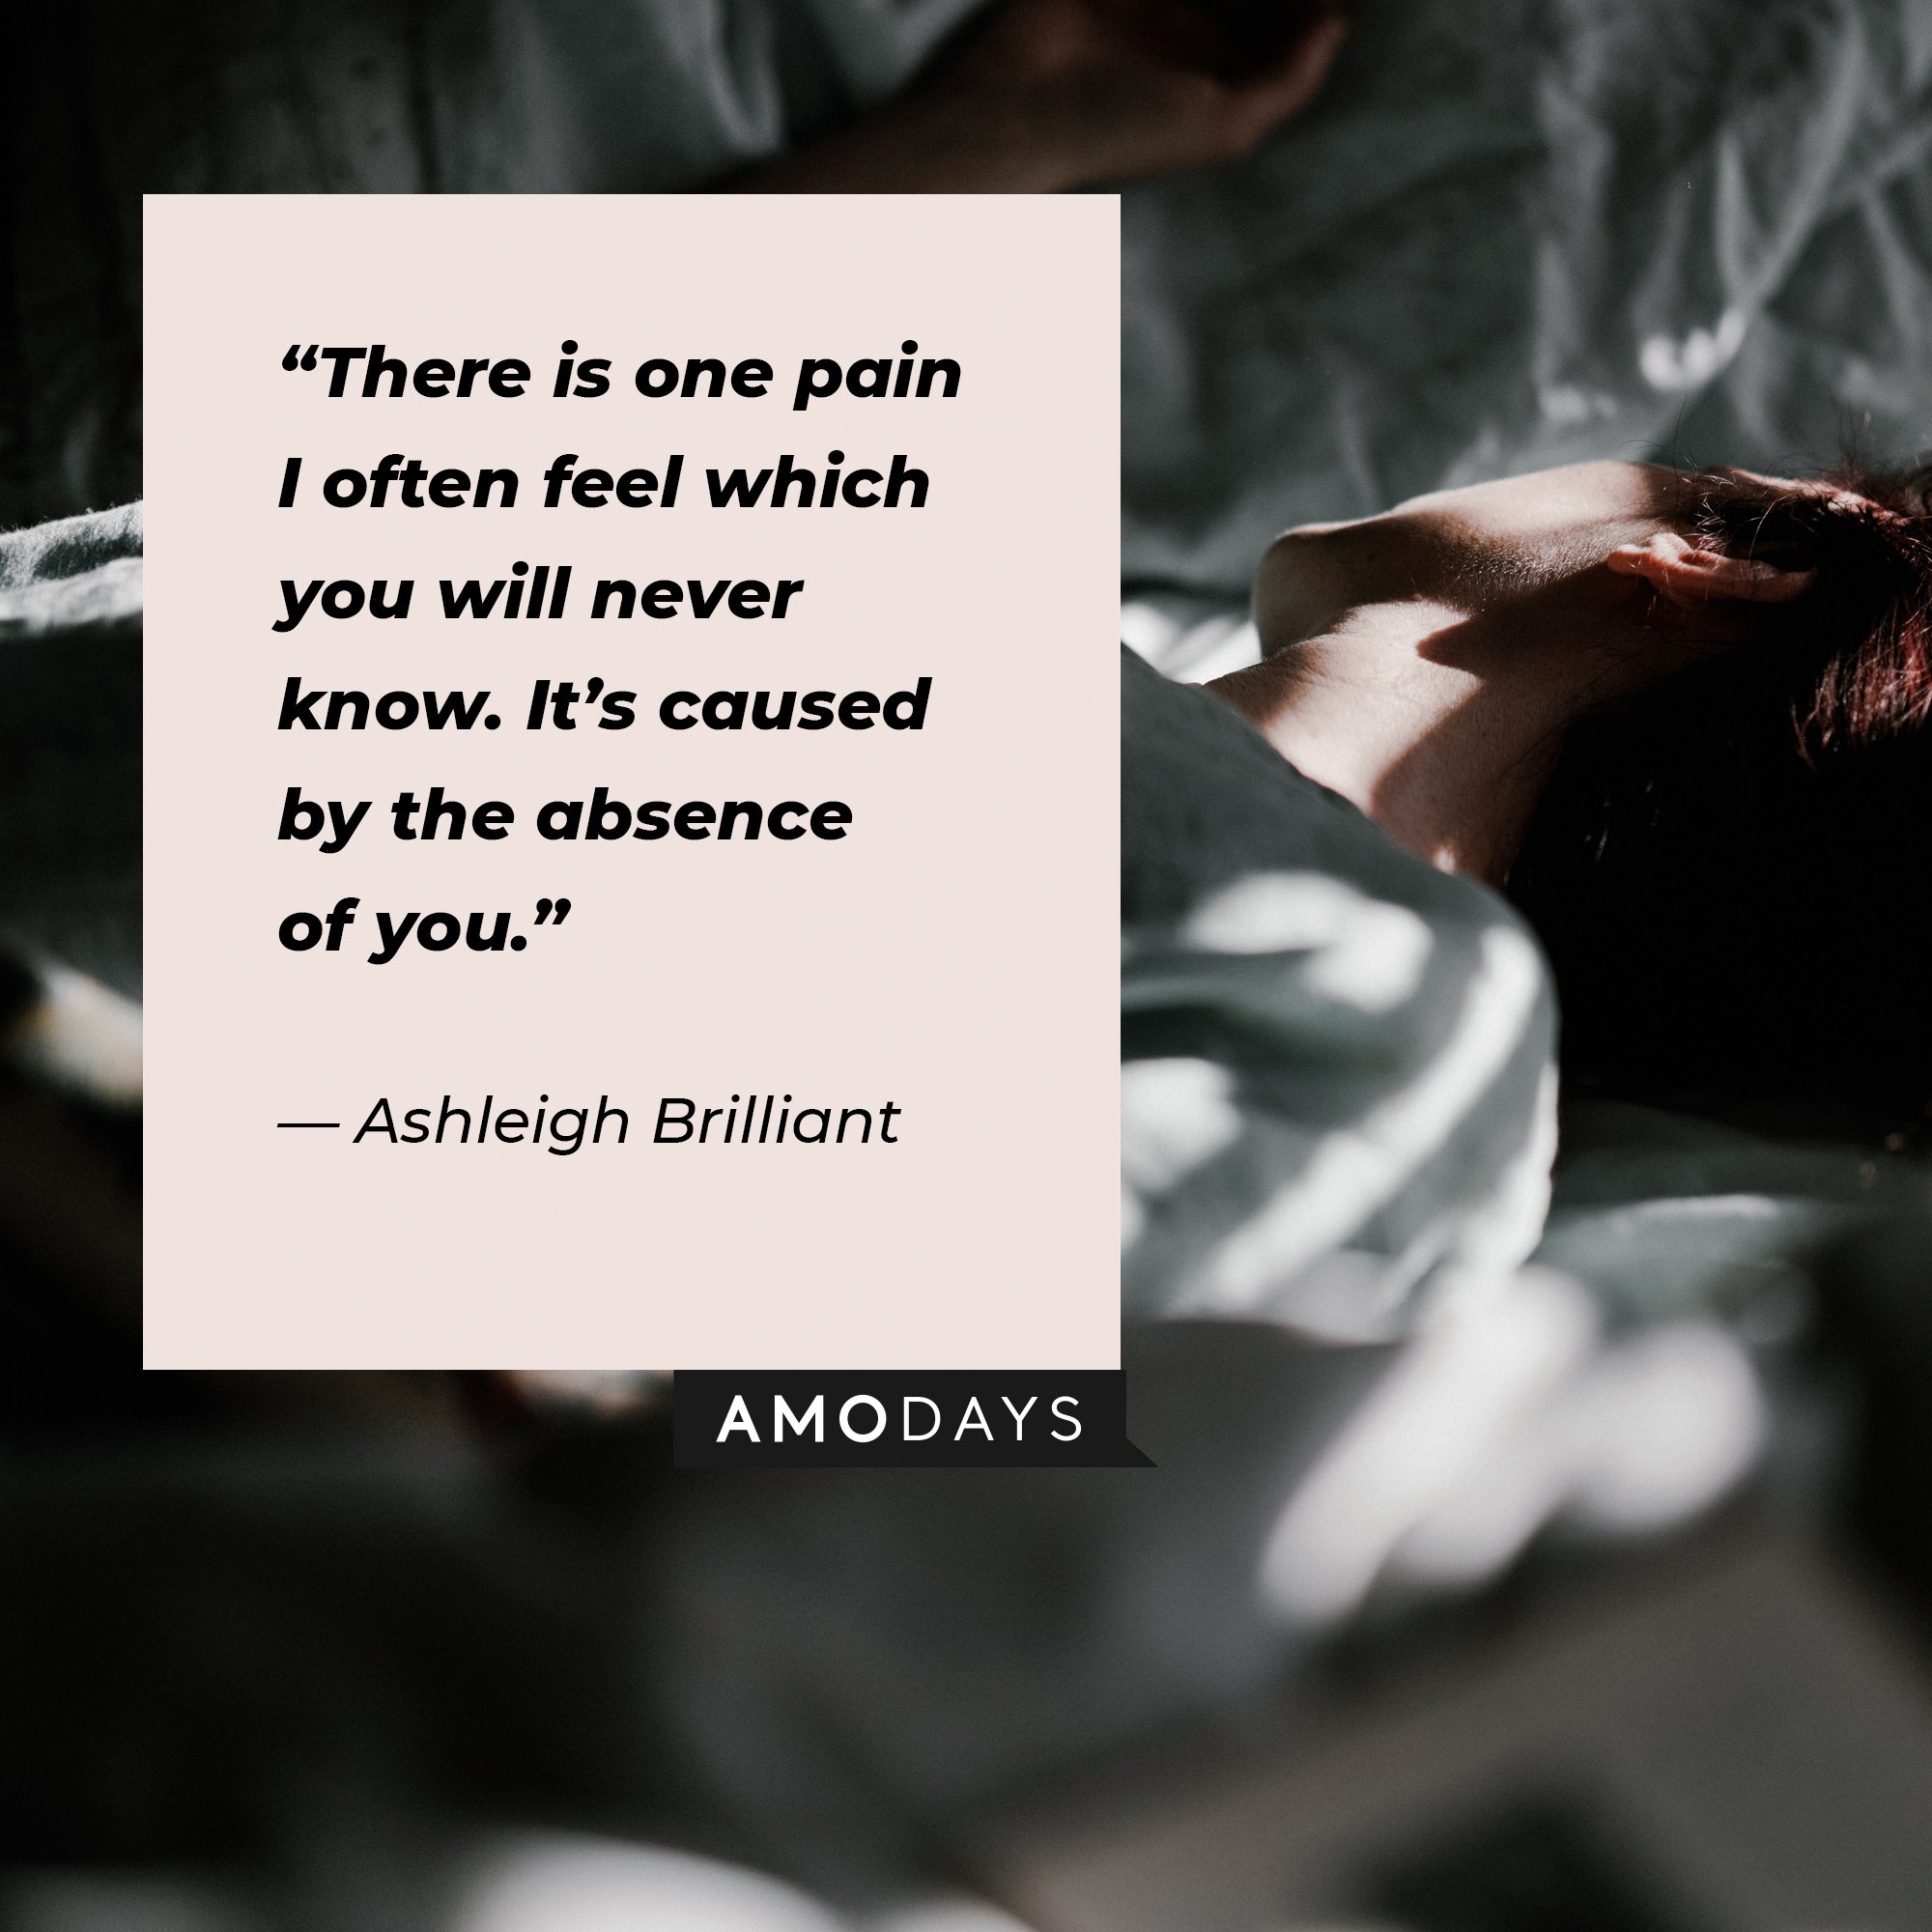 Ashleigh Brilliant’s quote: “There is one pain I often feel which you will never know. It’s caused by the absence of you.” | Image: AmoDays